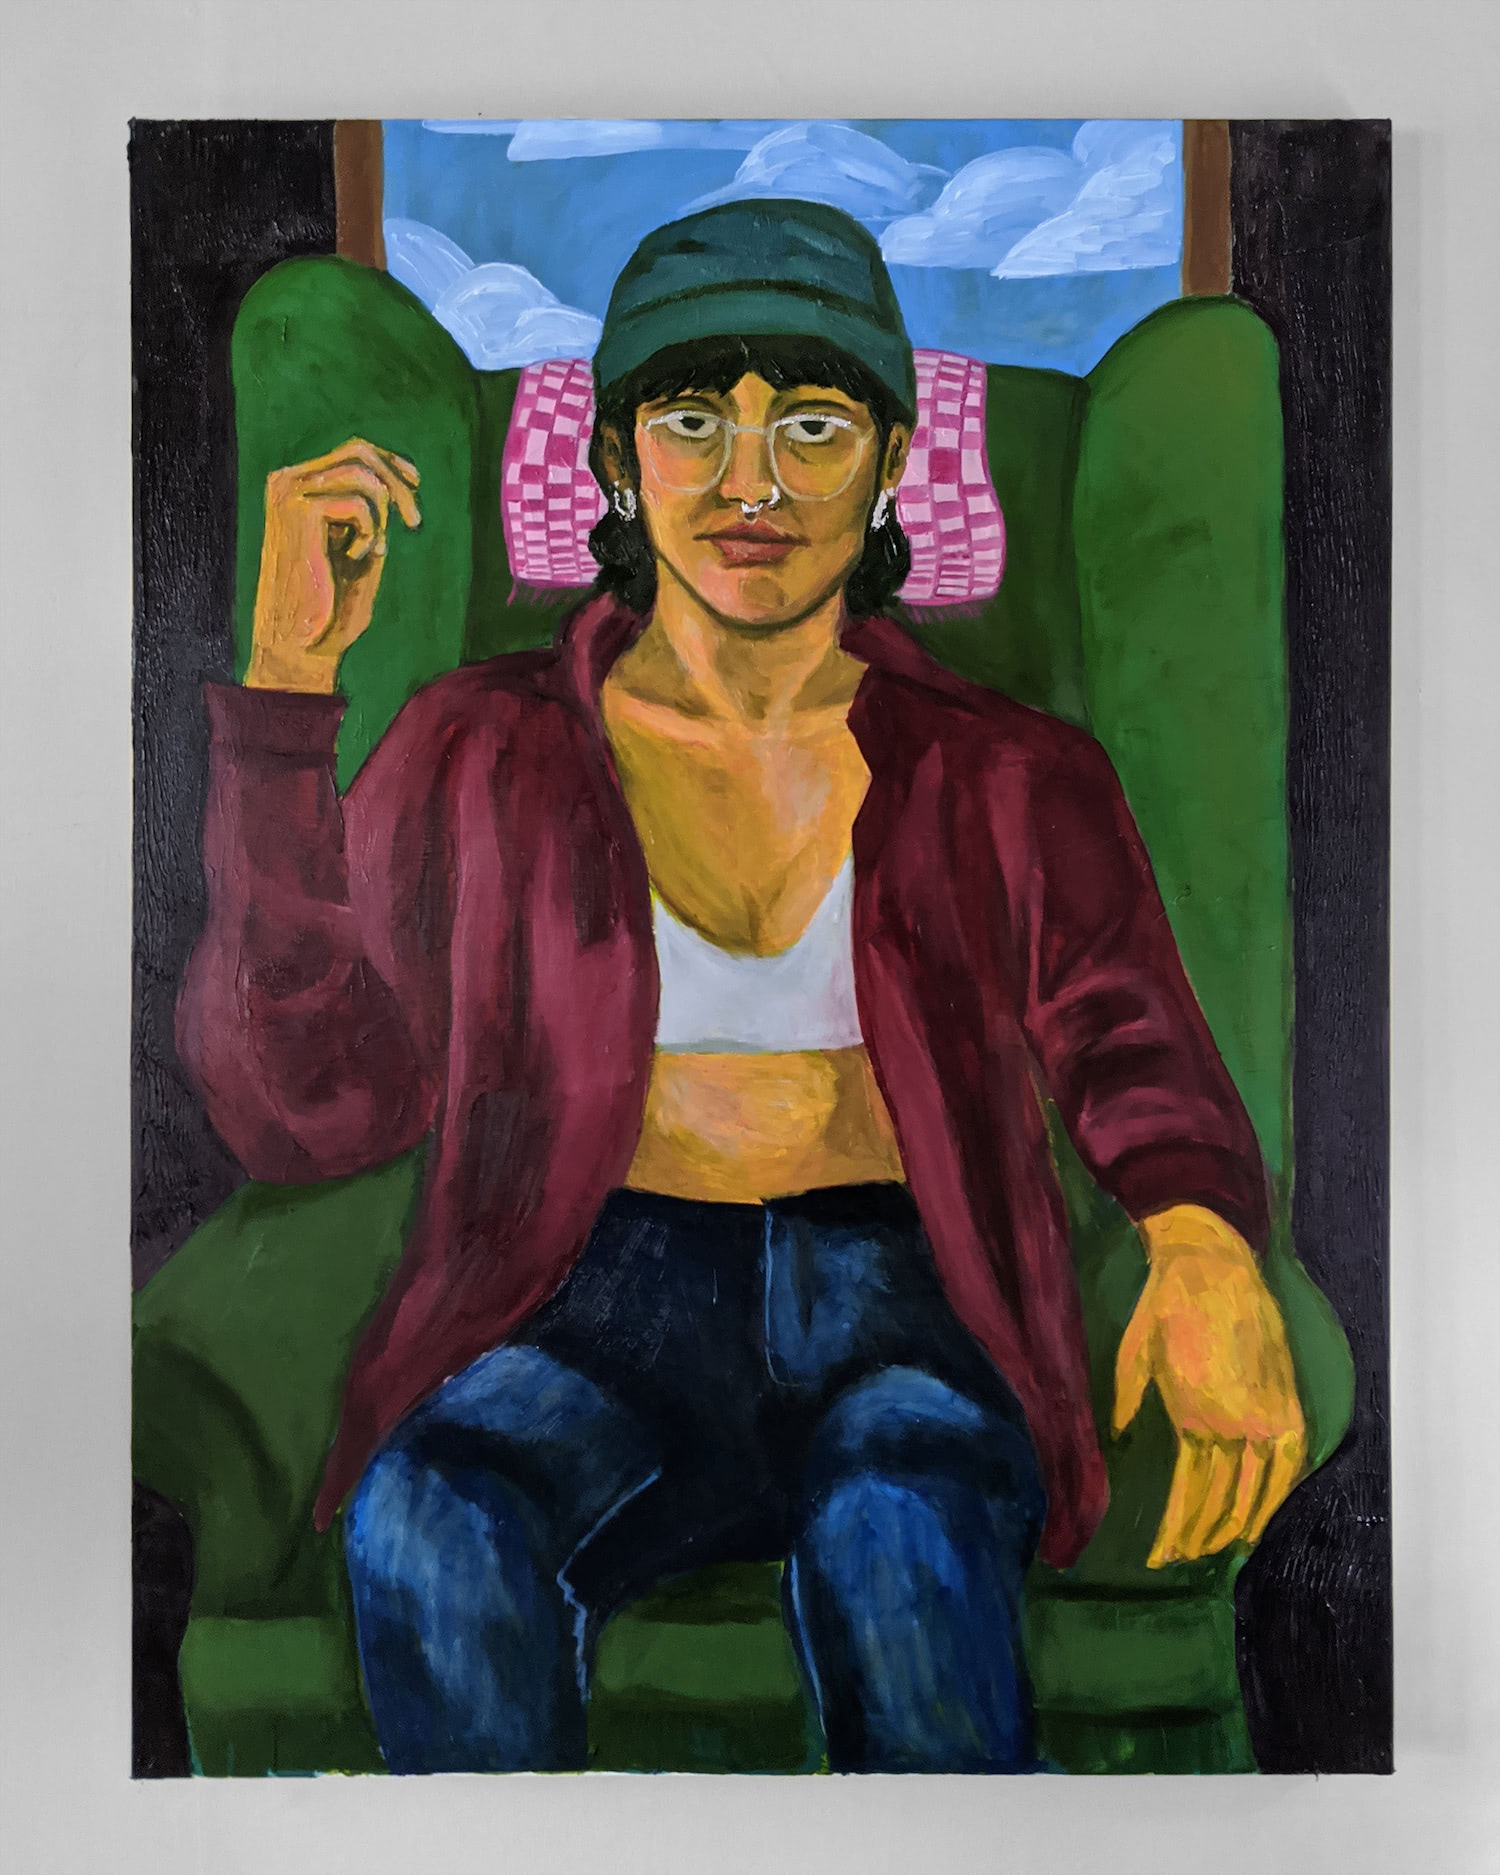 This is a painting of a woman sitting on a chair. She is sitting comfortably, with her fist casually in the air. She is looking directly at the audience with strength and confidence. Her skin is yellow and she is wearing men's clothing.